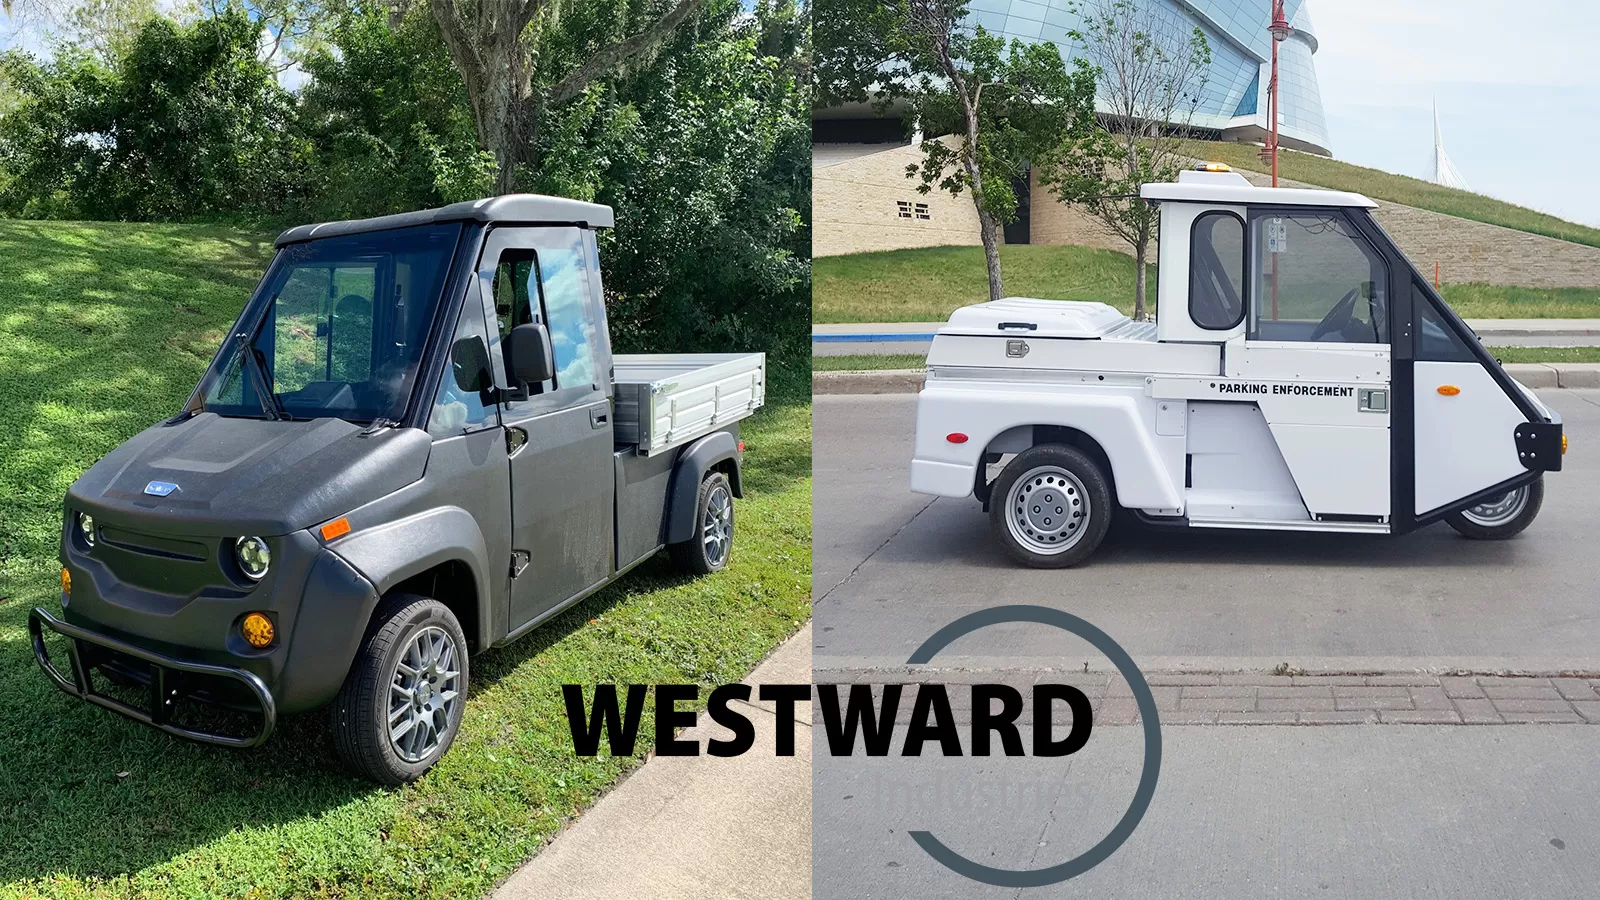 Westward: Specialized Vehicles for Every Need